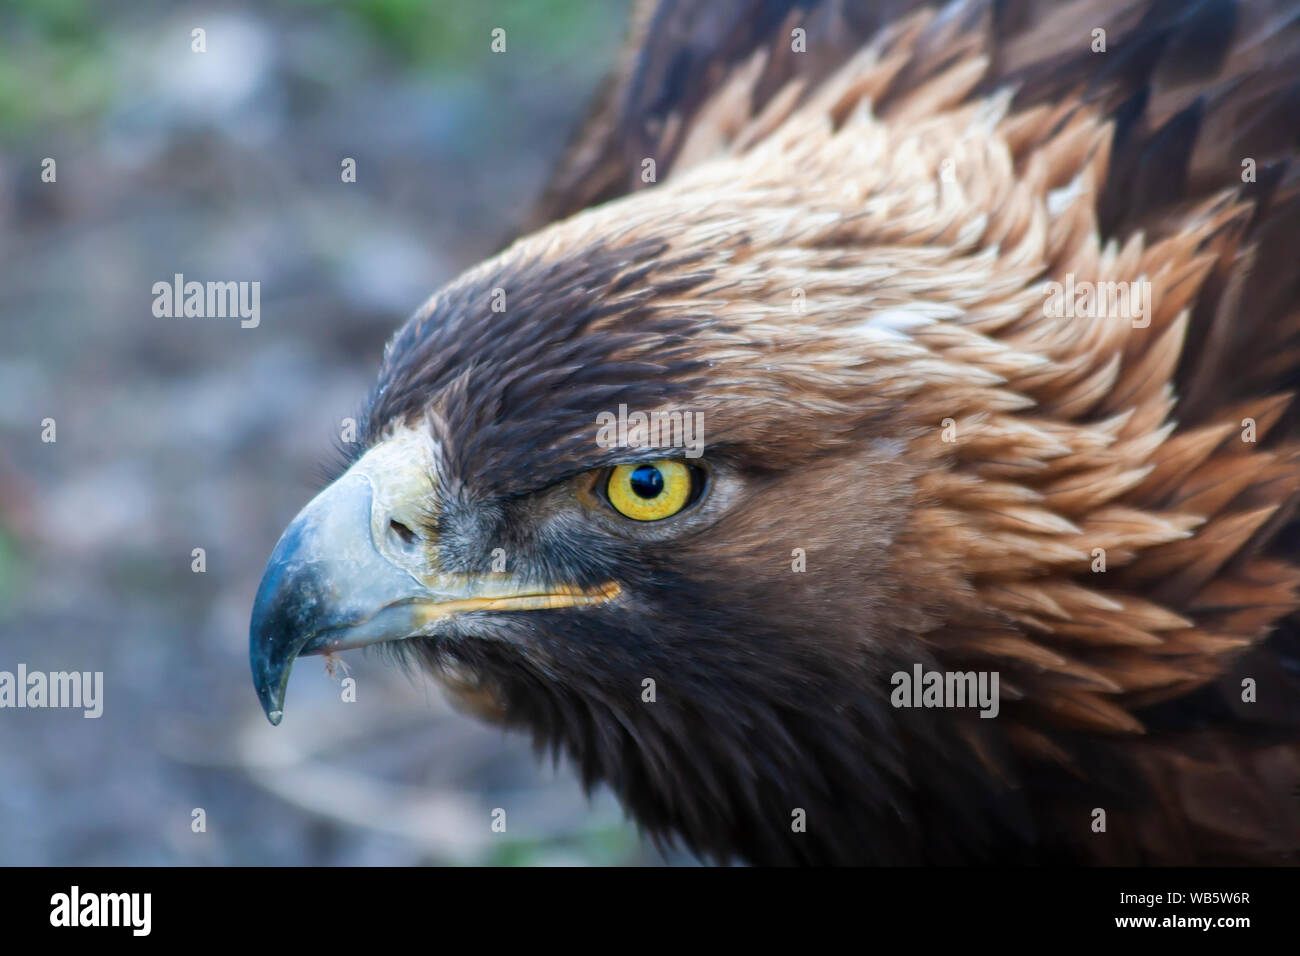 Closeup side view Face of a large Golden Eagle with yellow eyes in southern Utah right after eating it's meal Stock Photo